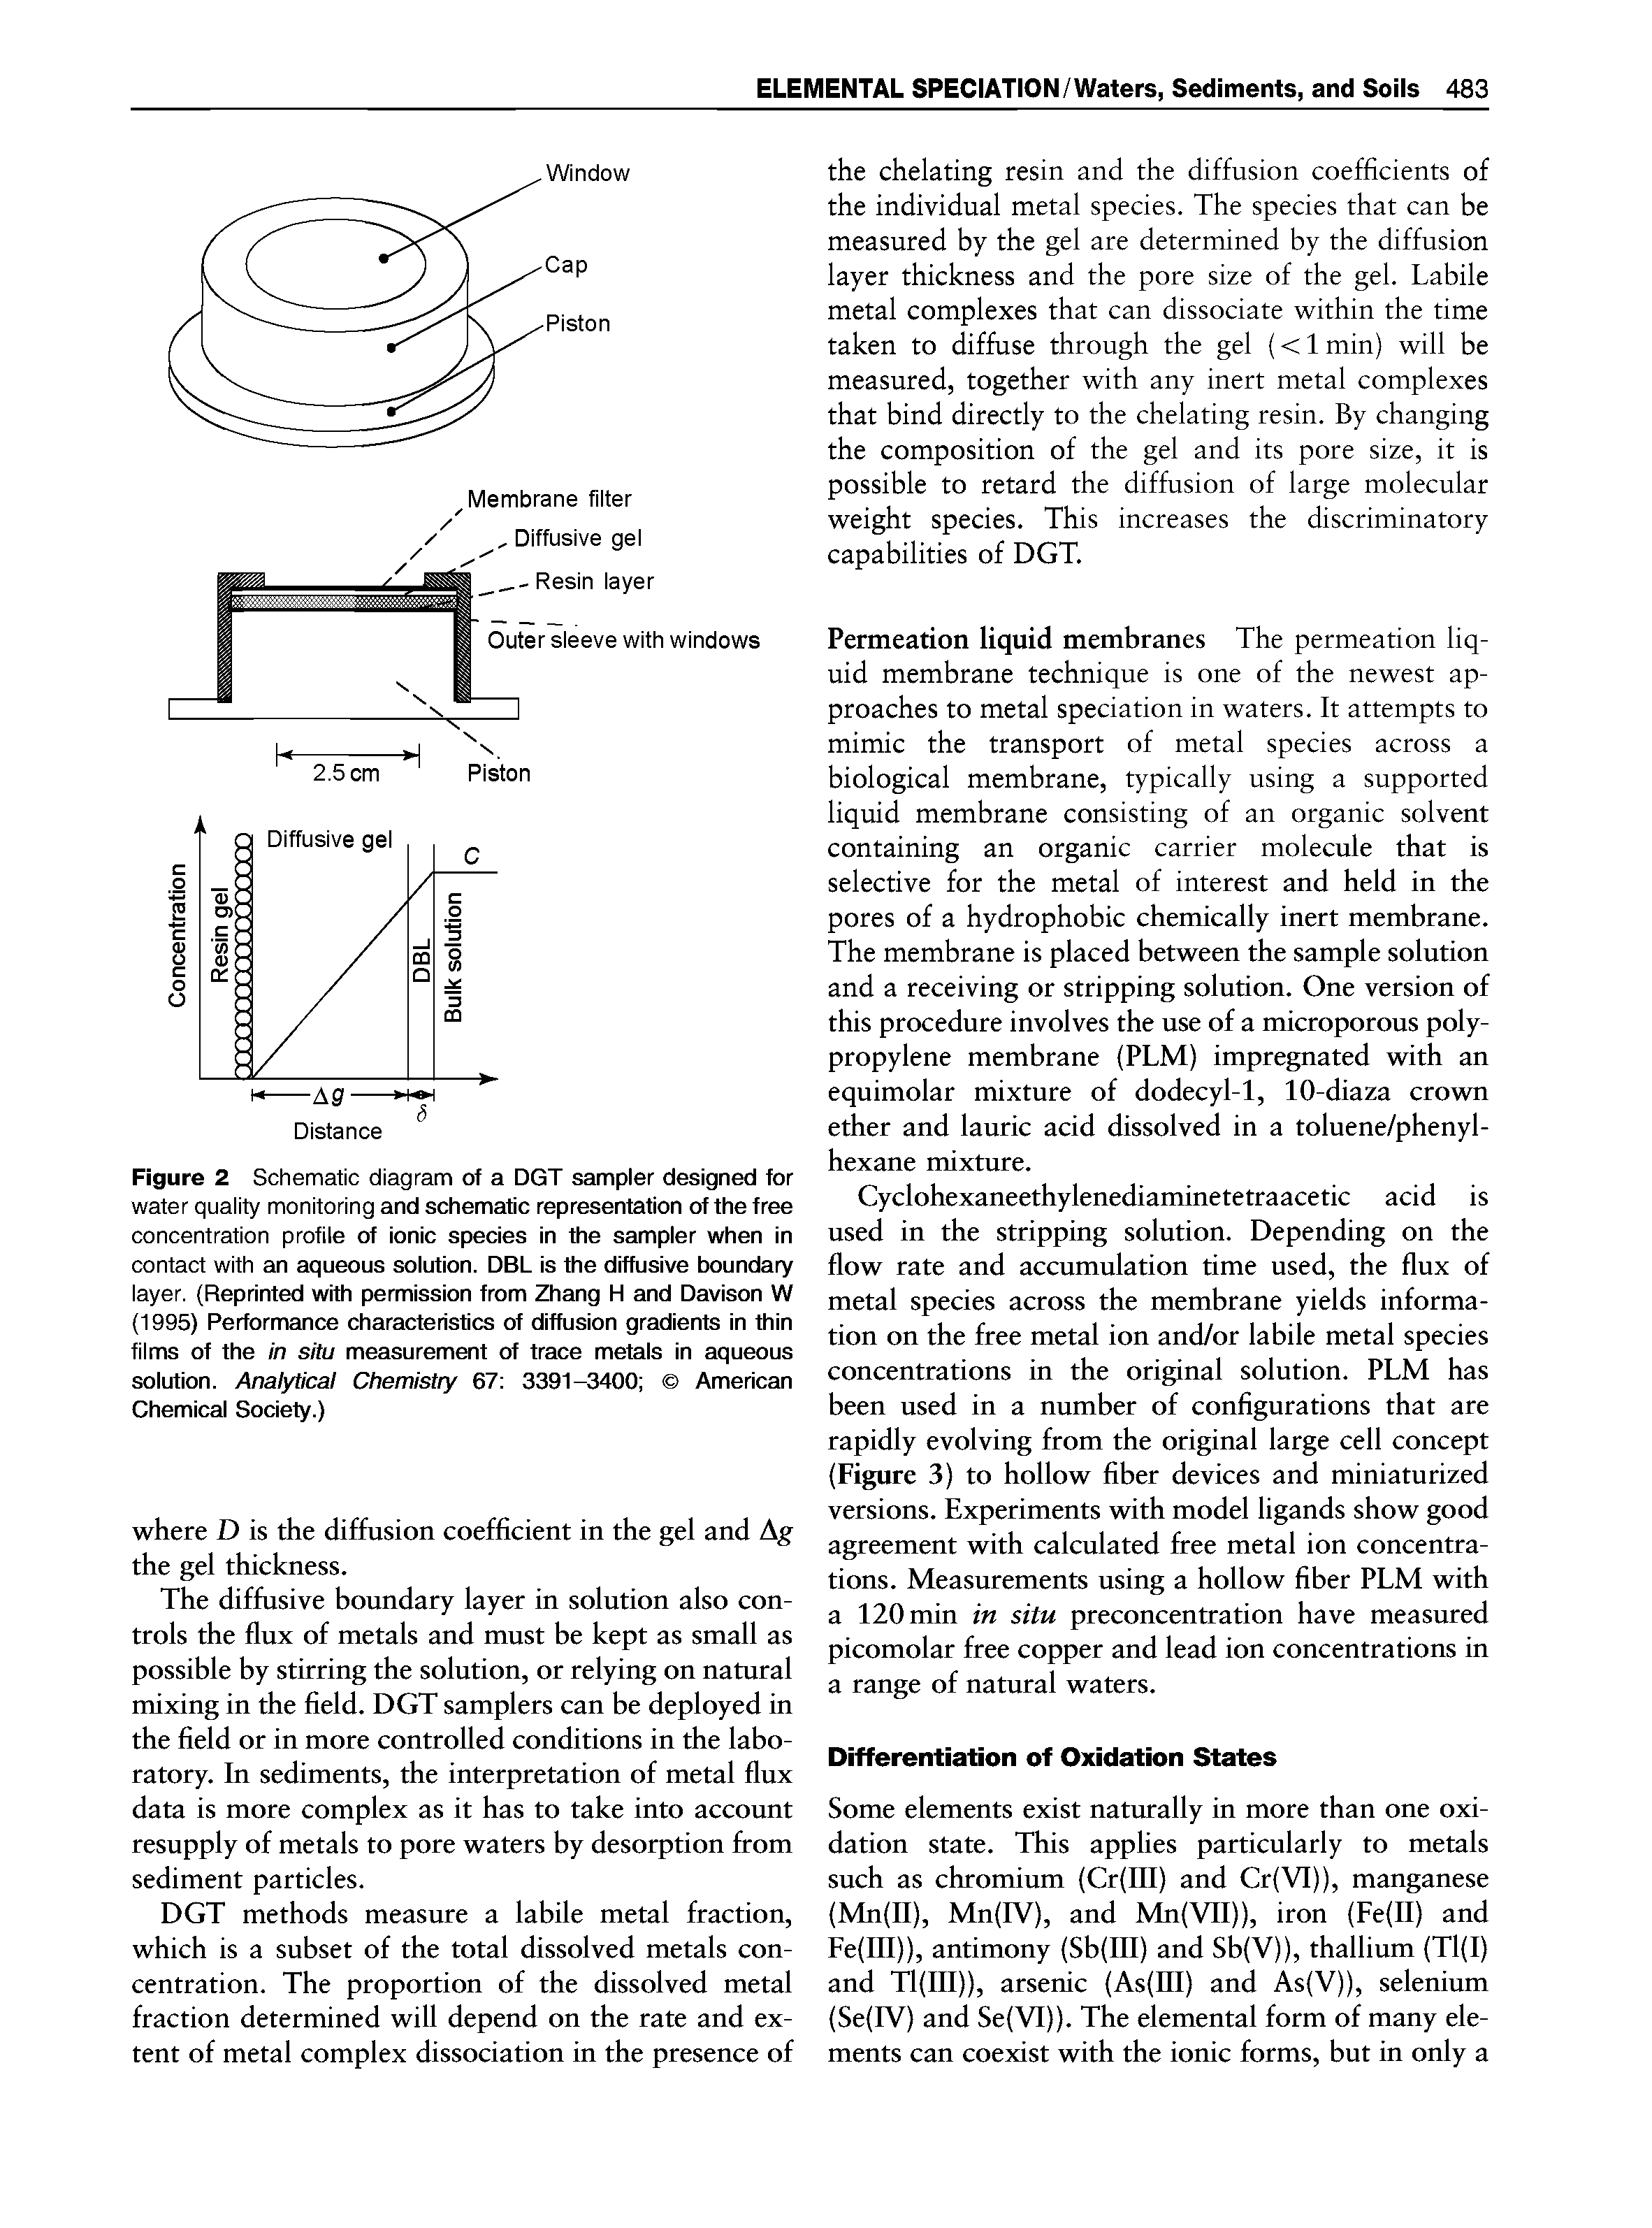 Figure 2 Schematic diagram of a DGT sampler designed for water quality monitoring and schematic representation of the free concentration profile of ionic species in the sampler when in contact with an aqueous solution. DBL is the diffusive boundary layer. (Reprinted with permission from Zhang H and Davison W (1995) Performance characteristics of diffusion gradients in thin films of the in situ measurement of trace metals in aqueous solution. Anaiytical Chemistry 67 3391-3400 American Chemical Society.)...